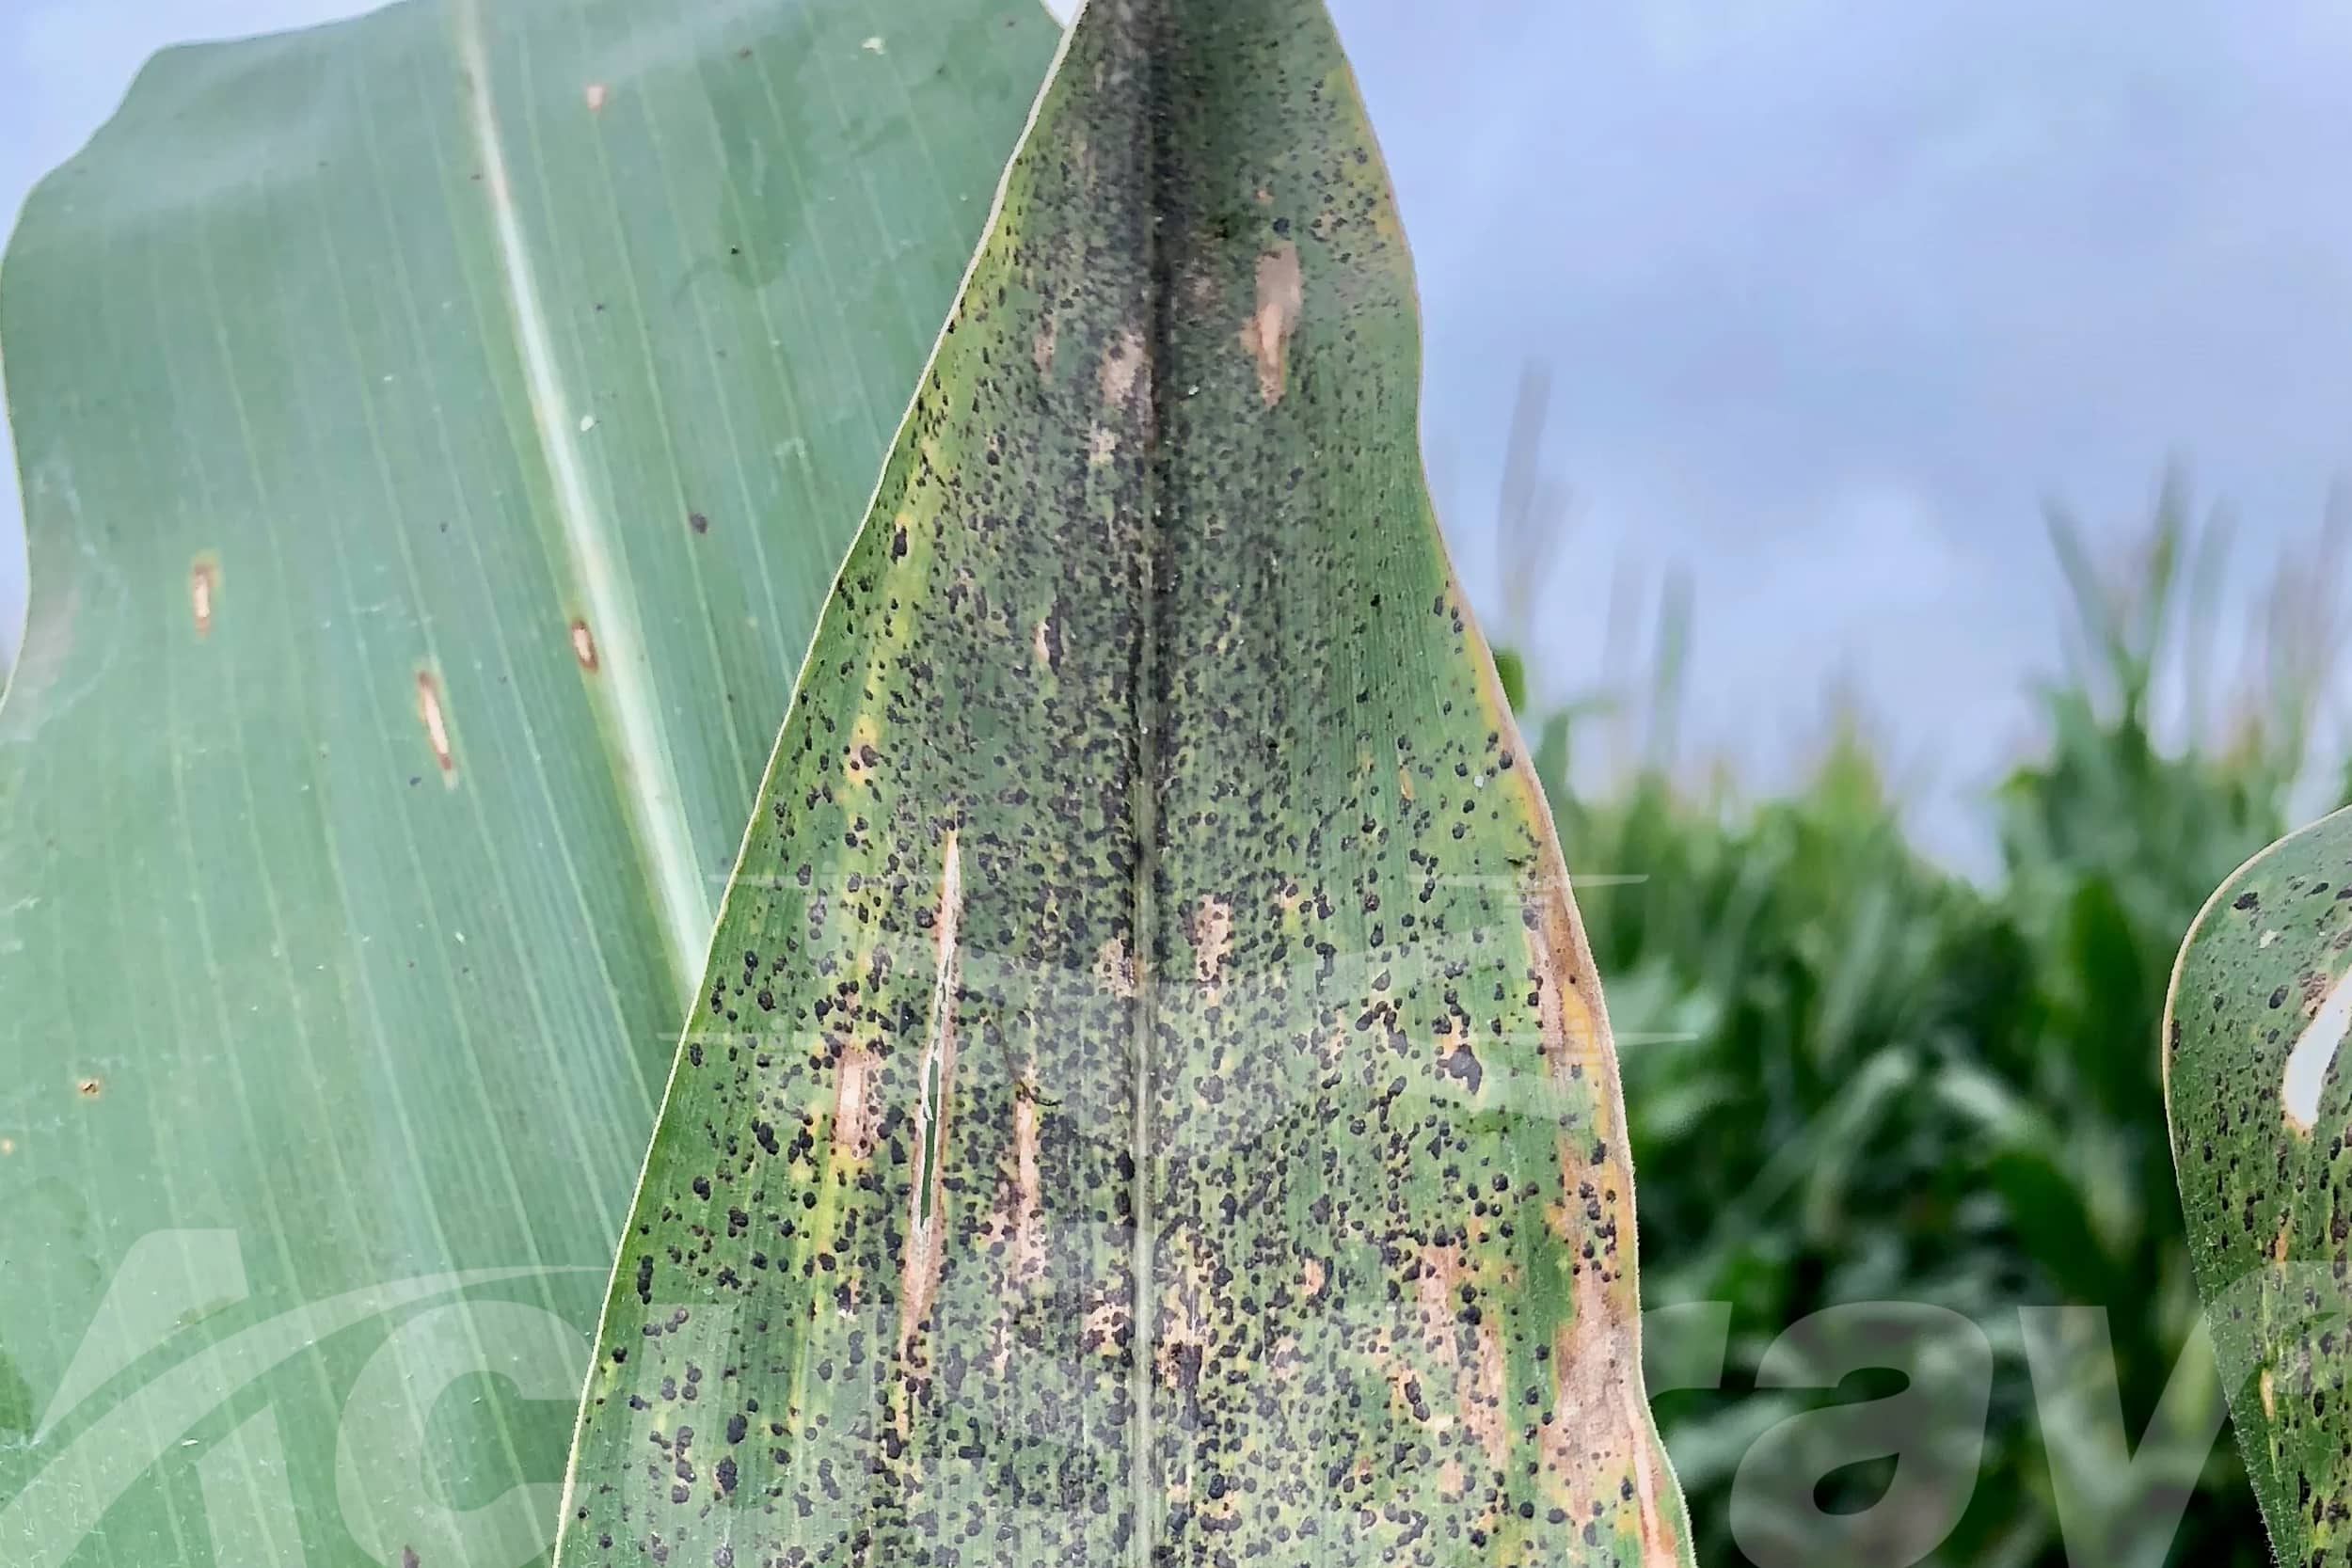 Close-up of a corn leaf with distinct black lesions indicating tar spot infestation.